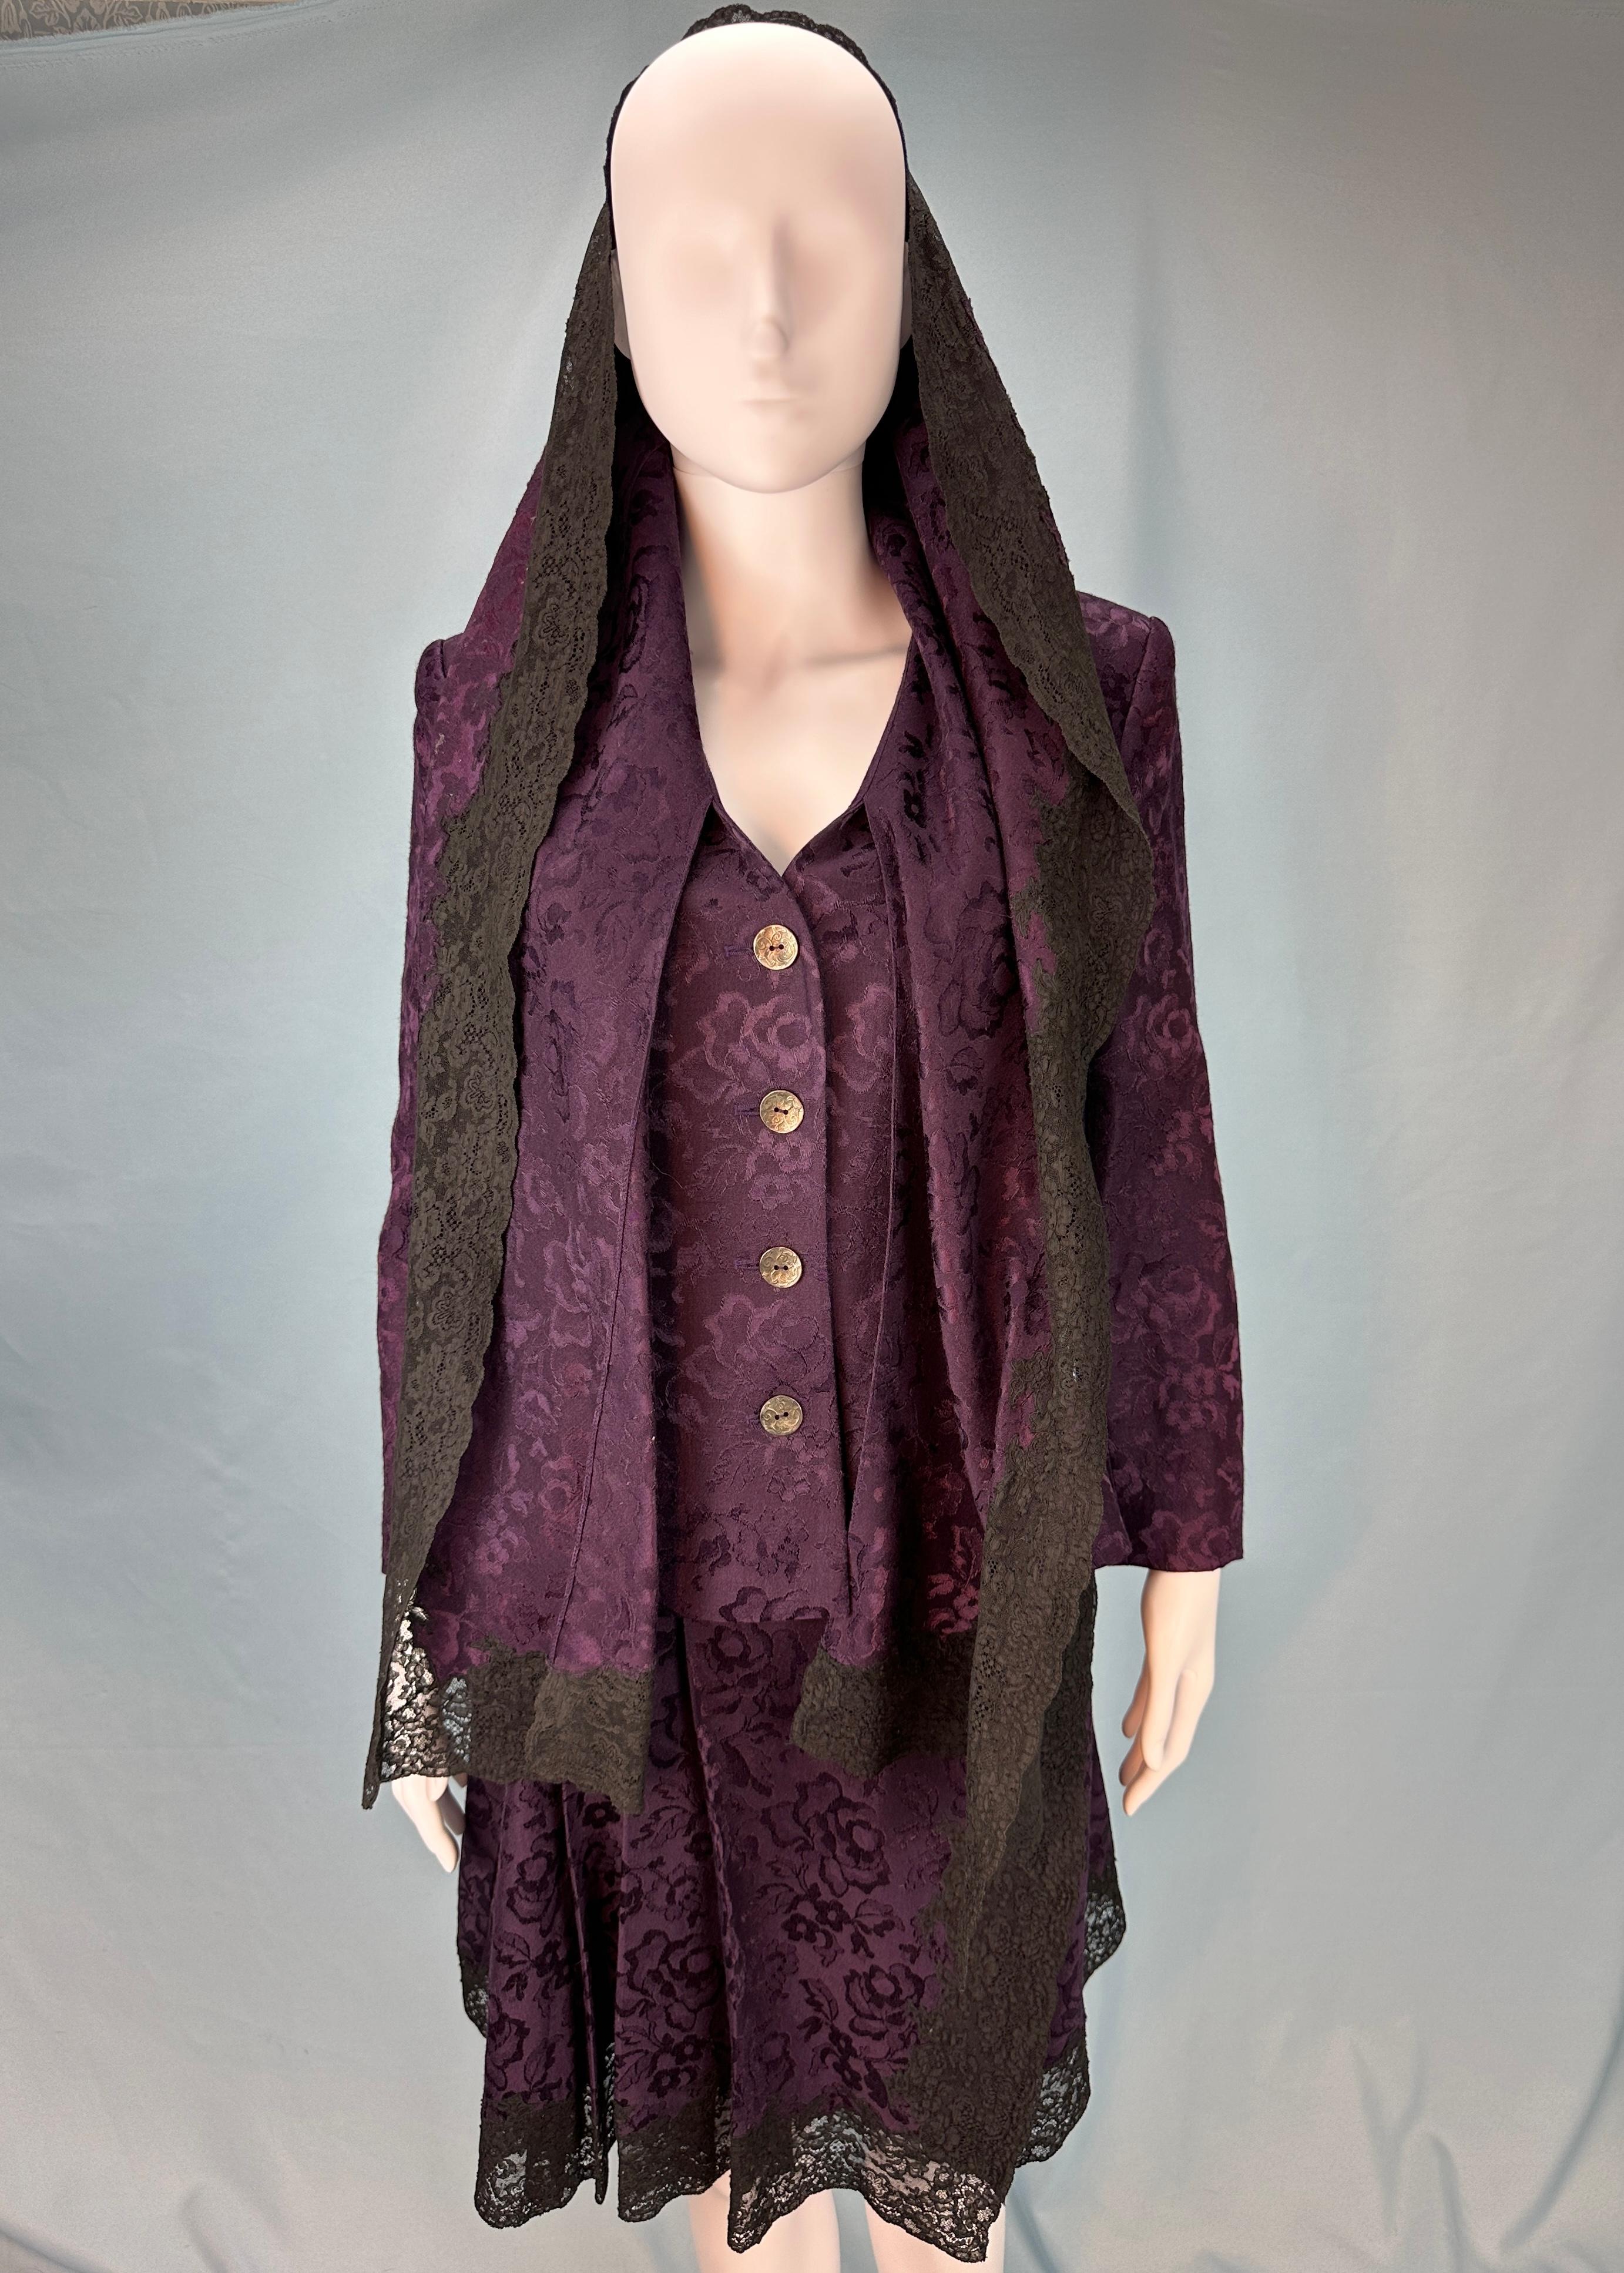 Dior Fall 1998 Purple Silk Brocade and Lace Skirt & Jacket Set For Sale 3